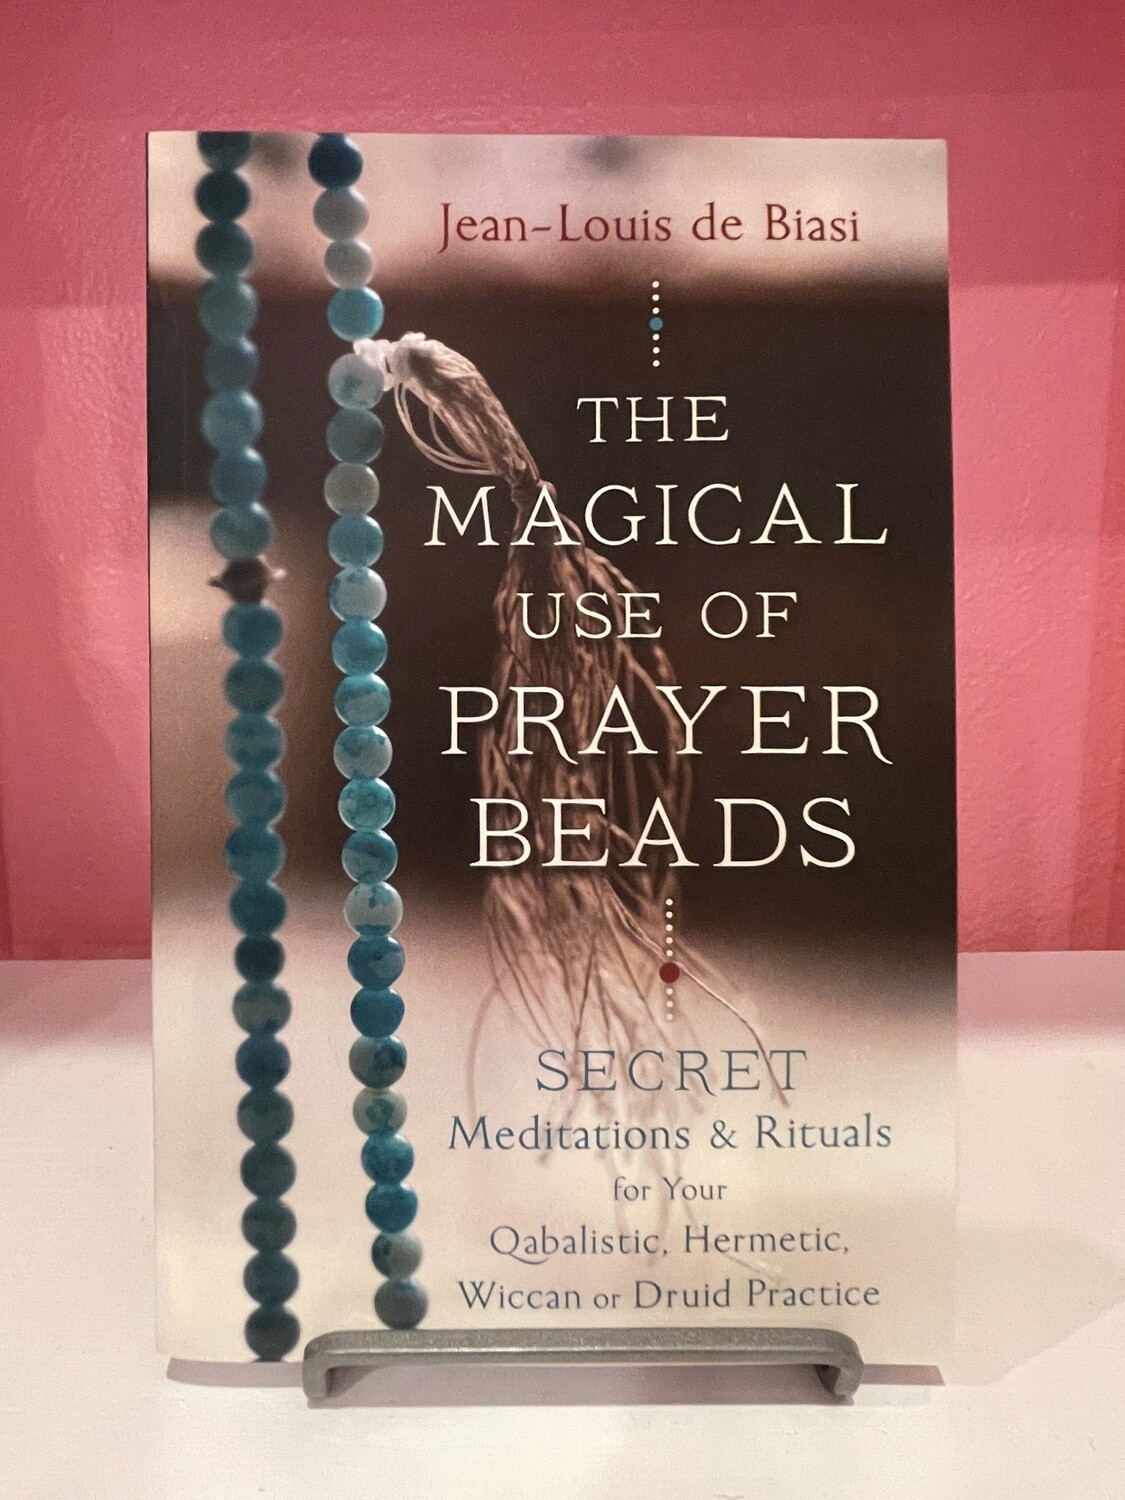 The Magical Use of Prayer Beads